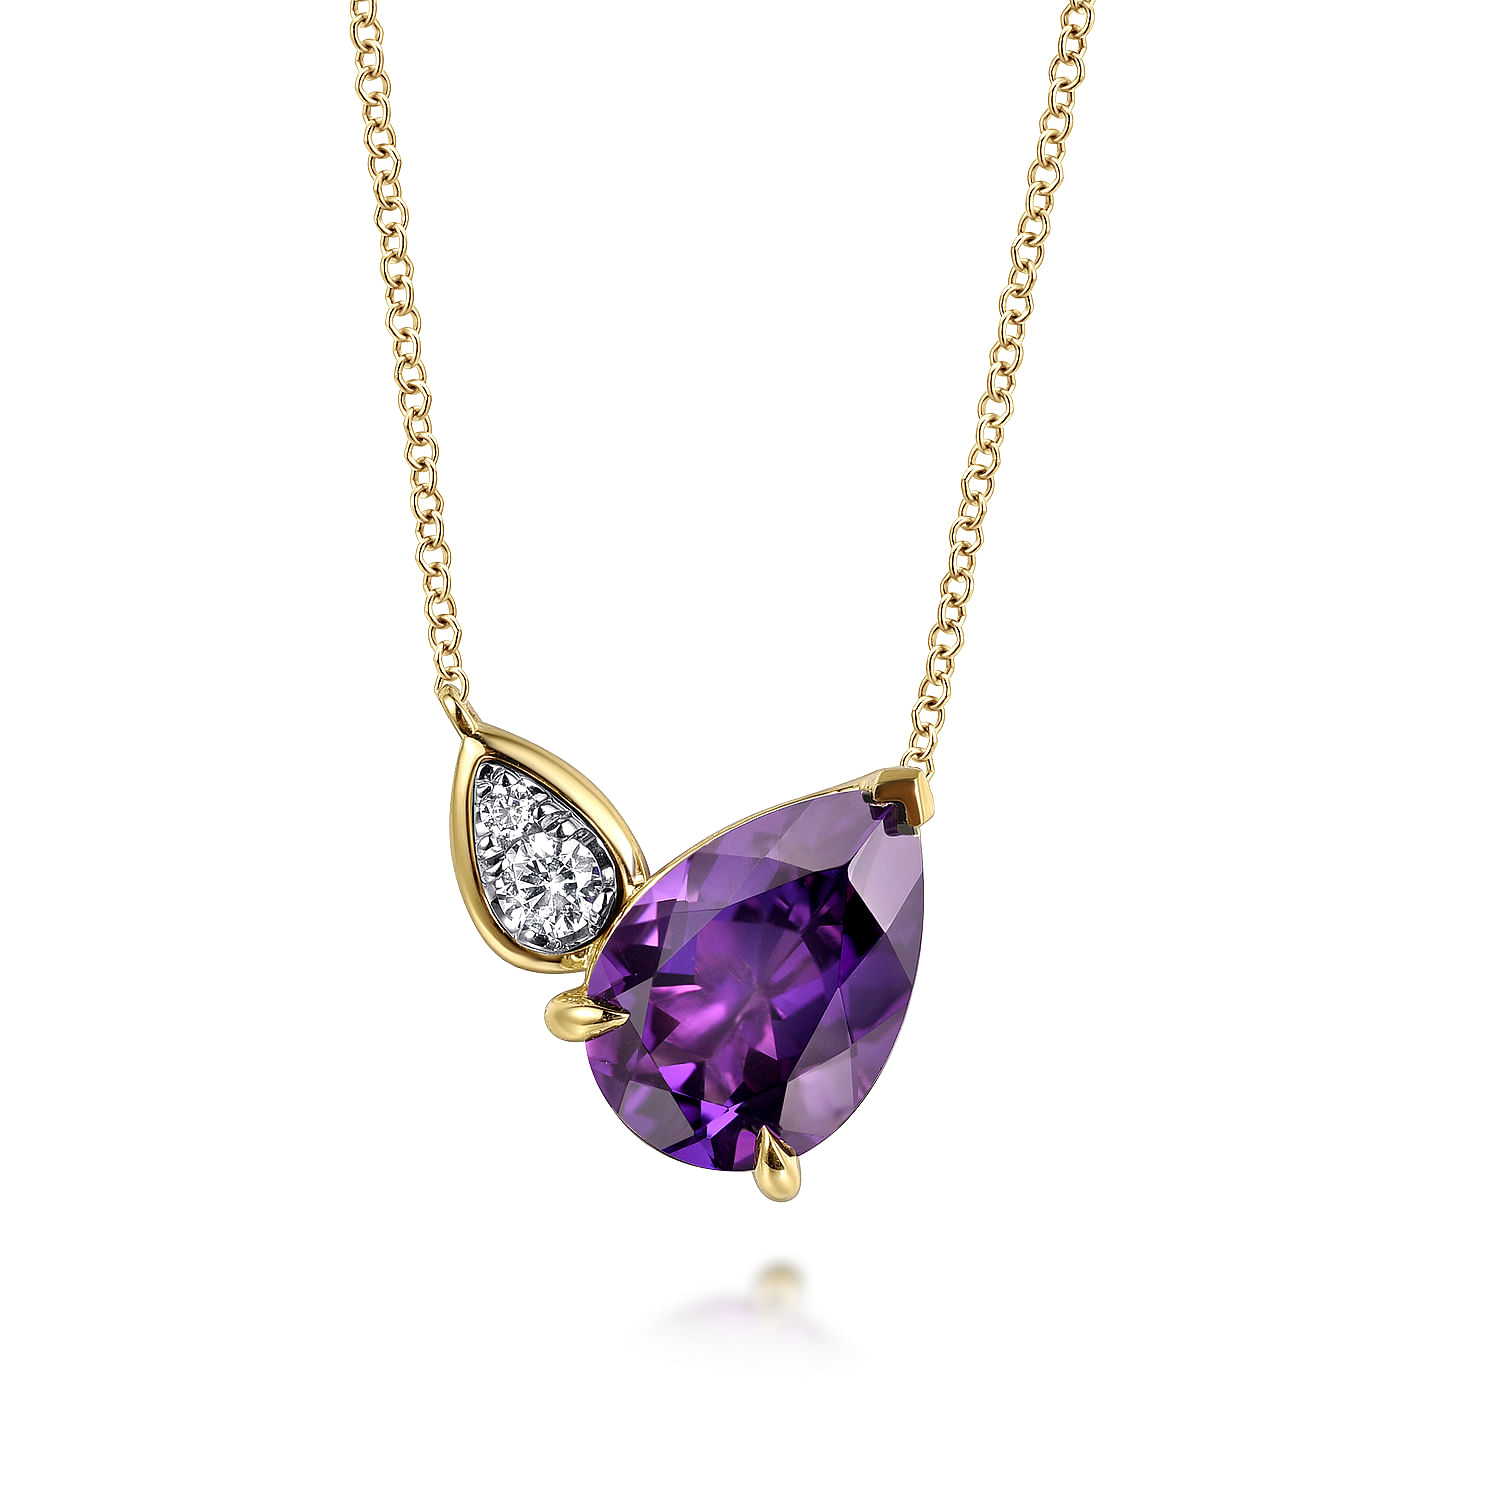 Gabriel - 14K White & Yellow Gold Diamond and Amethyst Pendant Necklace